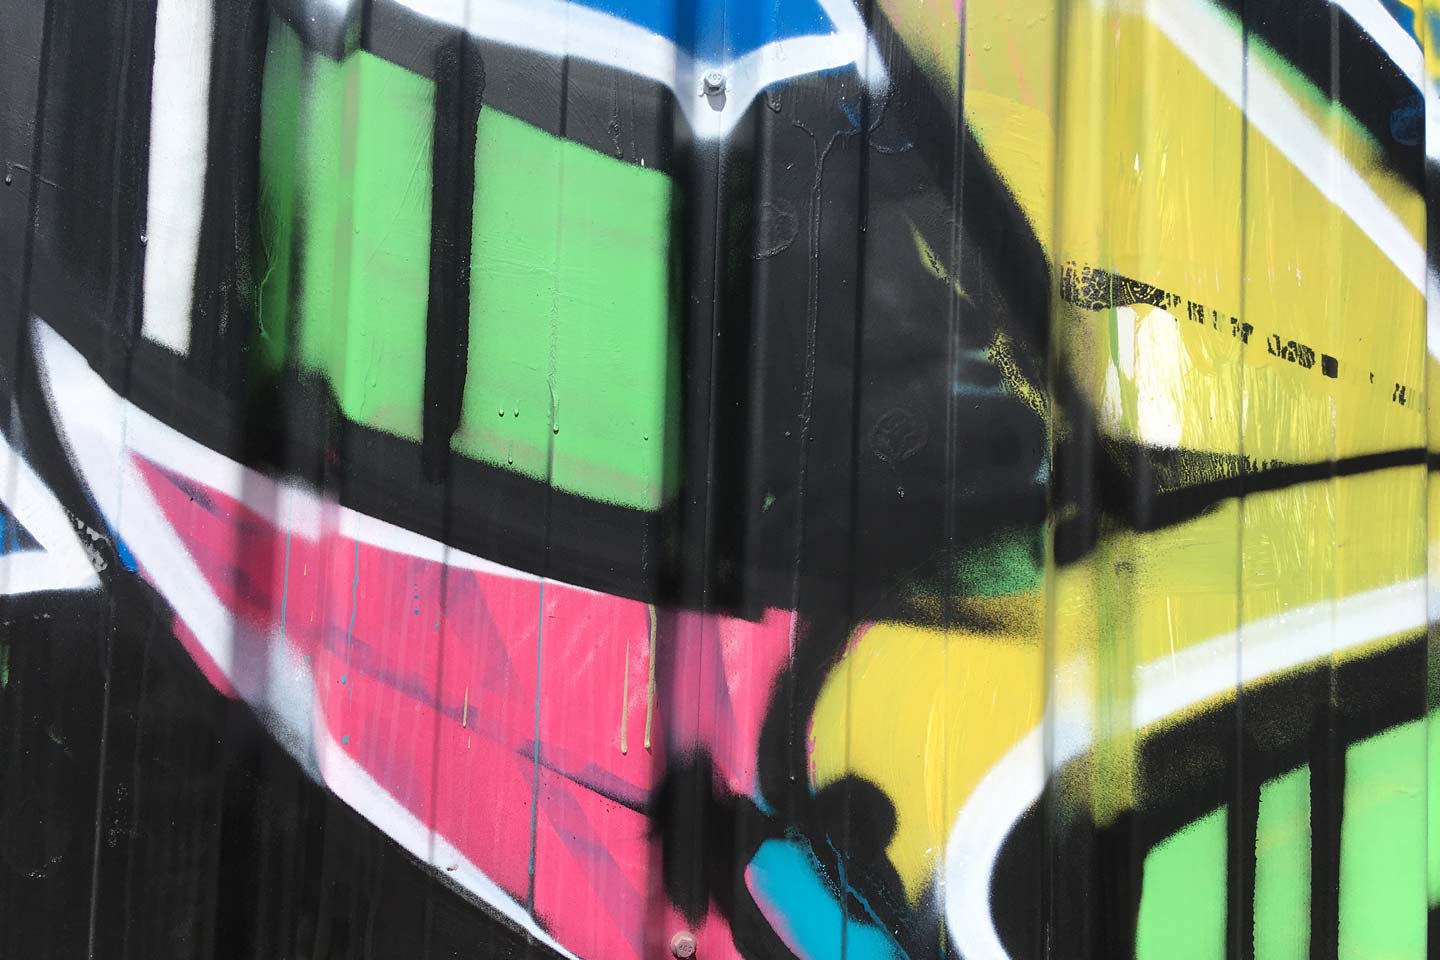 Olhao Street Art - pink, green, yellow and black shapes